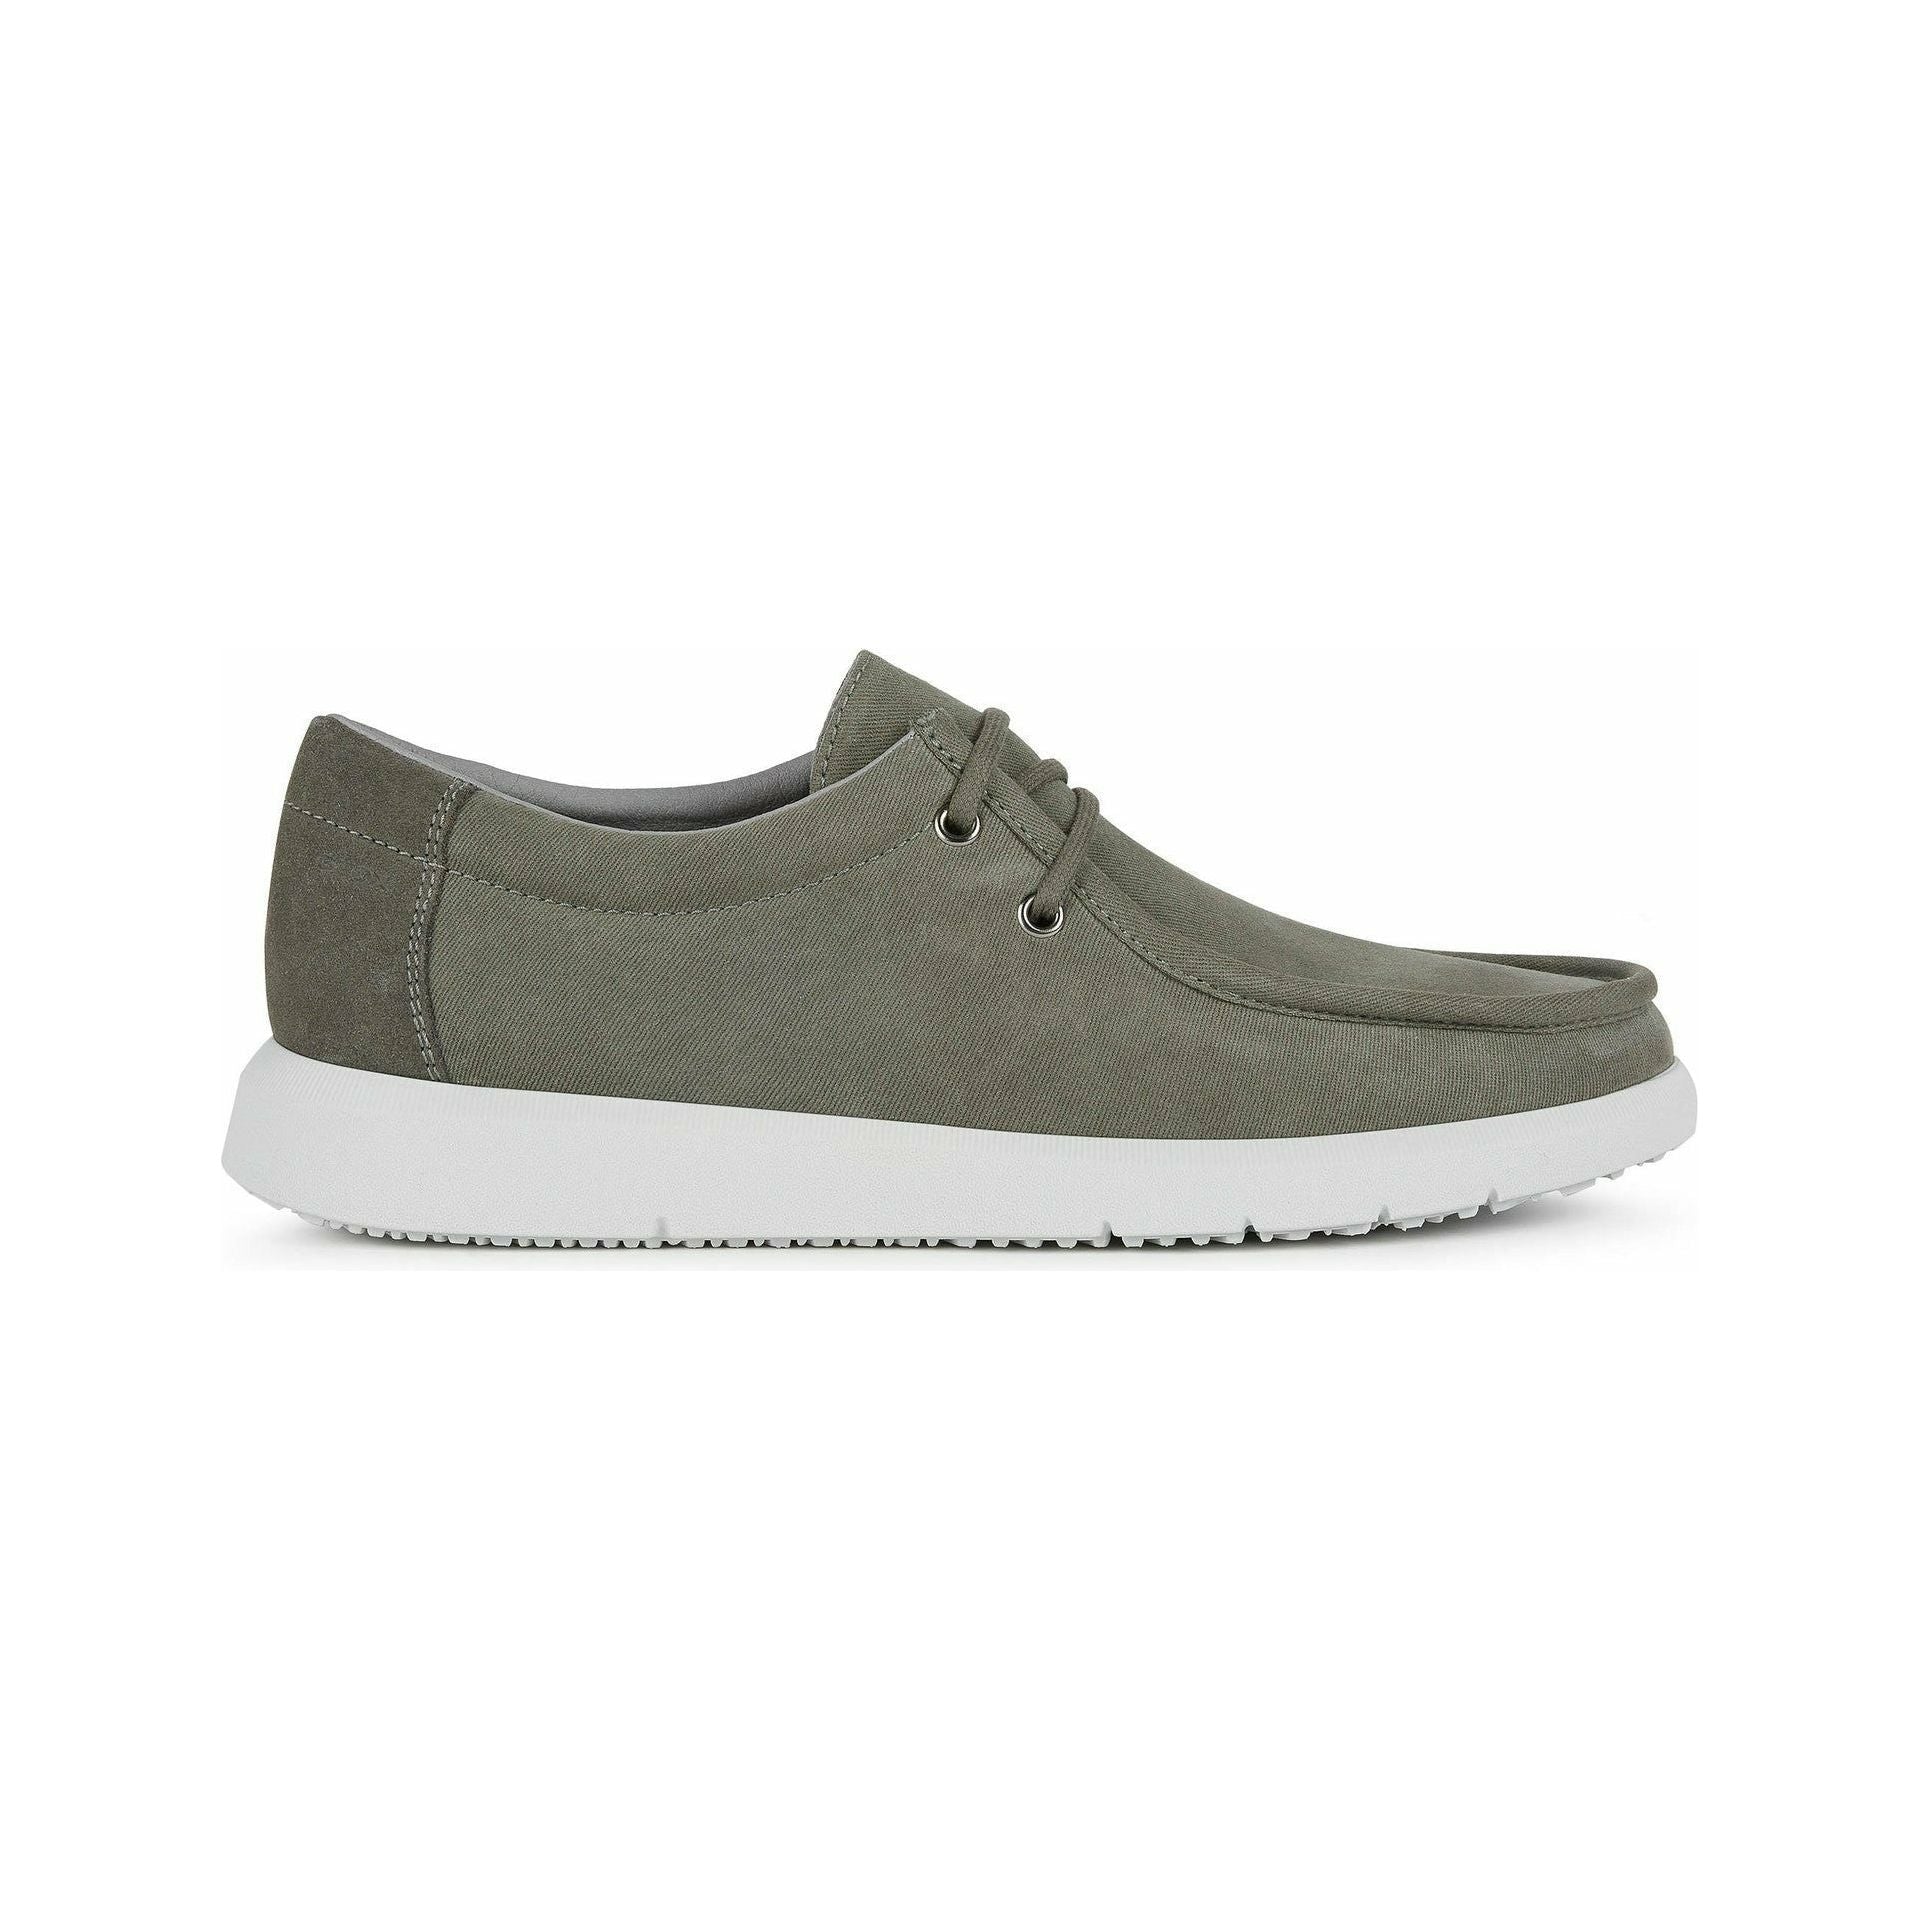 Geox Errico - Men's Canvas Lace Shoe in Olive | Geox Shoes | Wisemans | Bantry | West Cork | Munster | Ireland